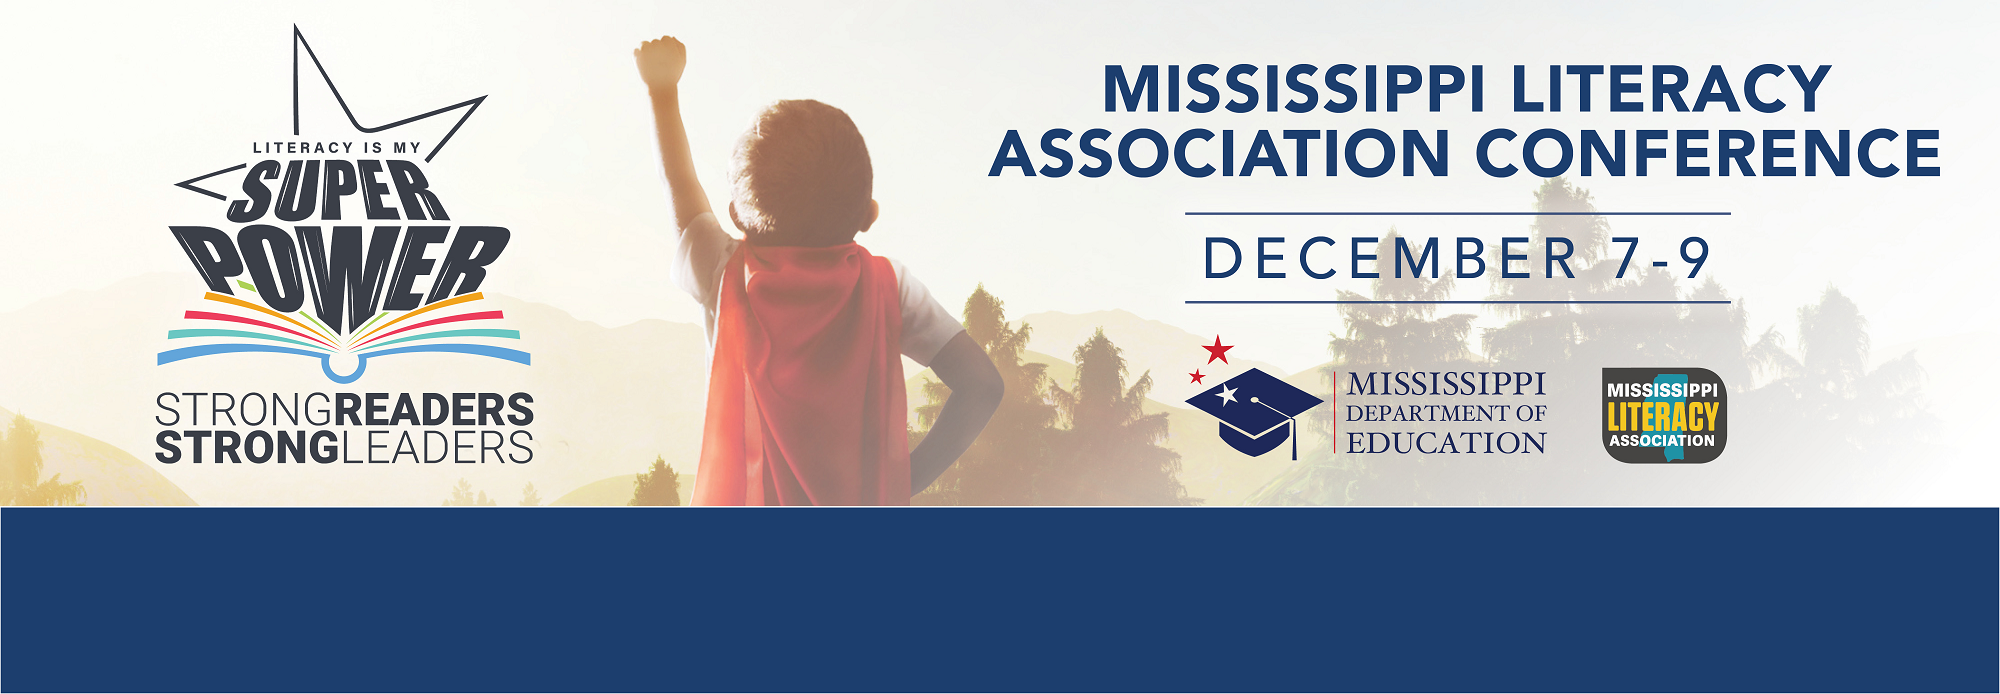 K-8 Teachers: Register Now for the MS Literacy Conference Dec. 7-9